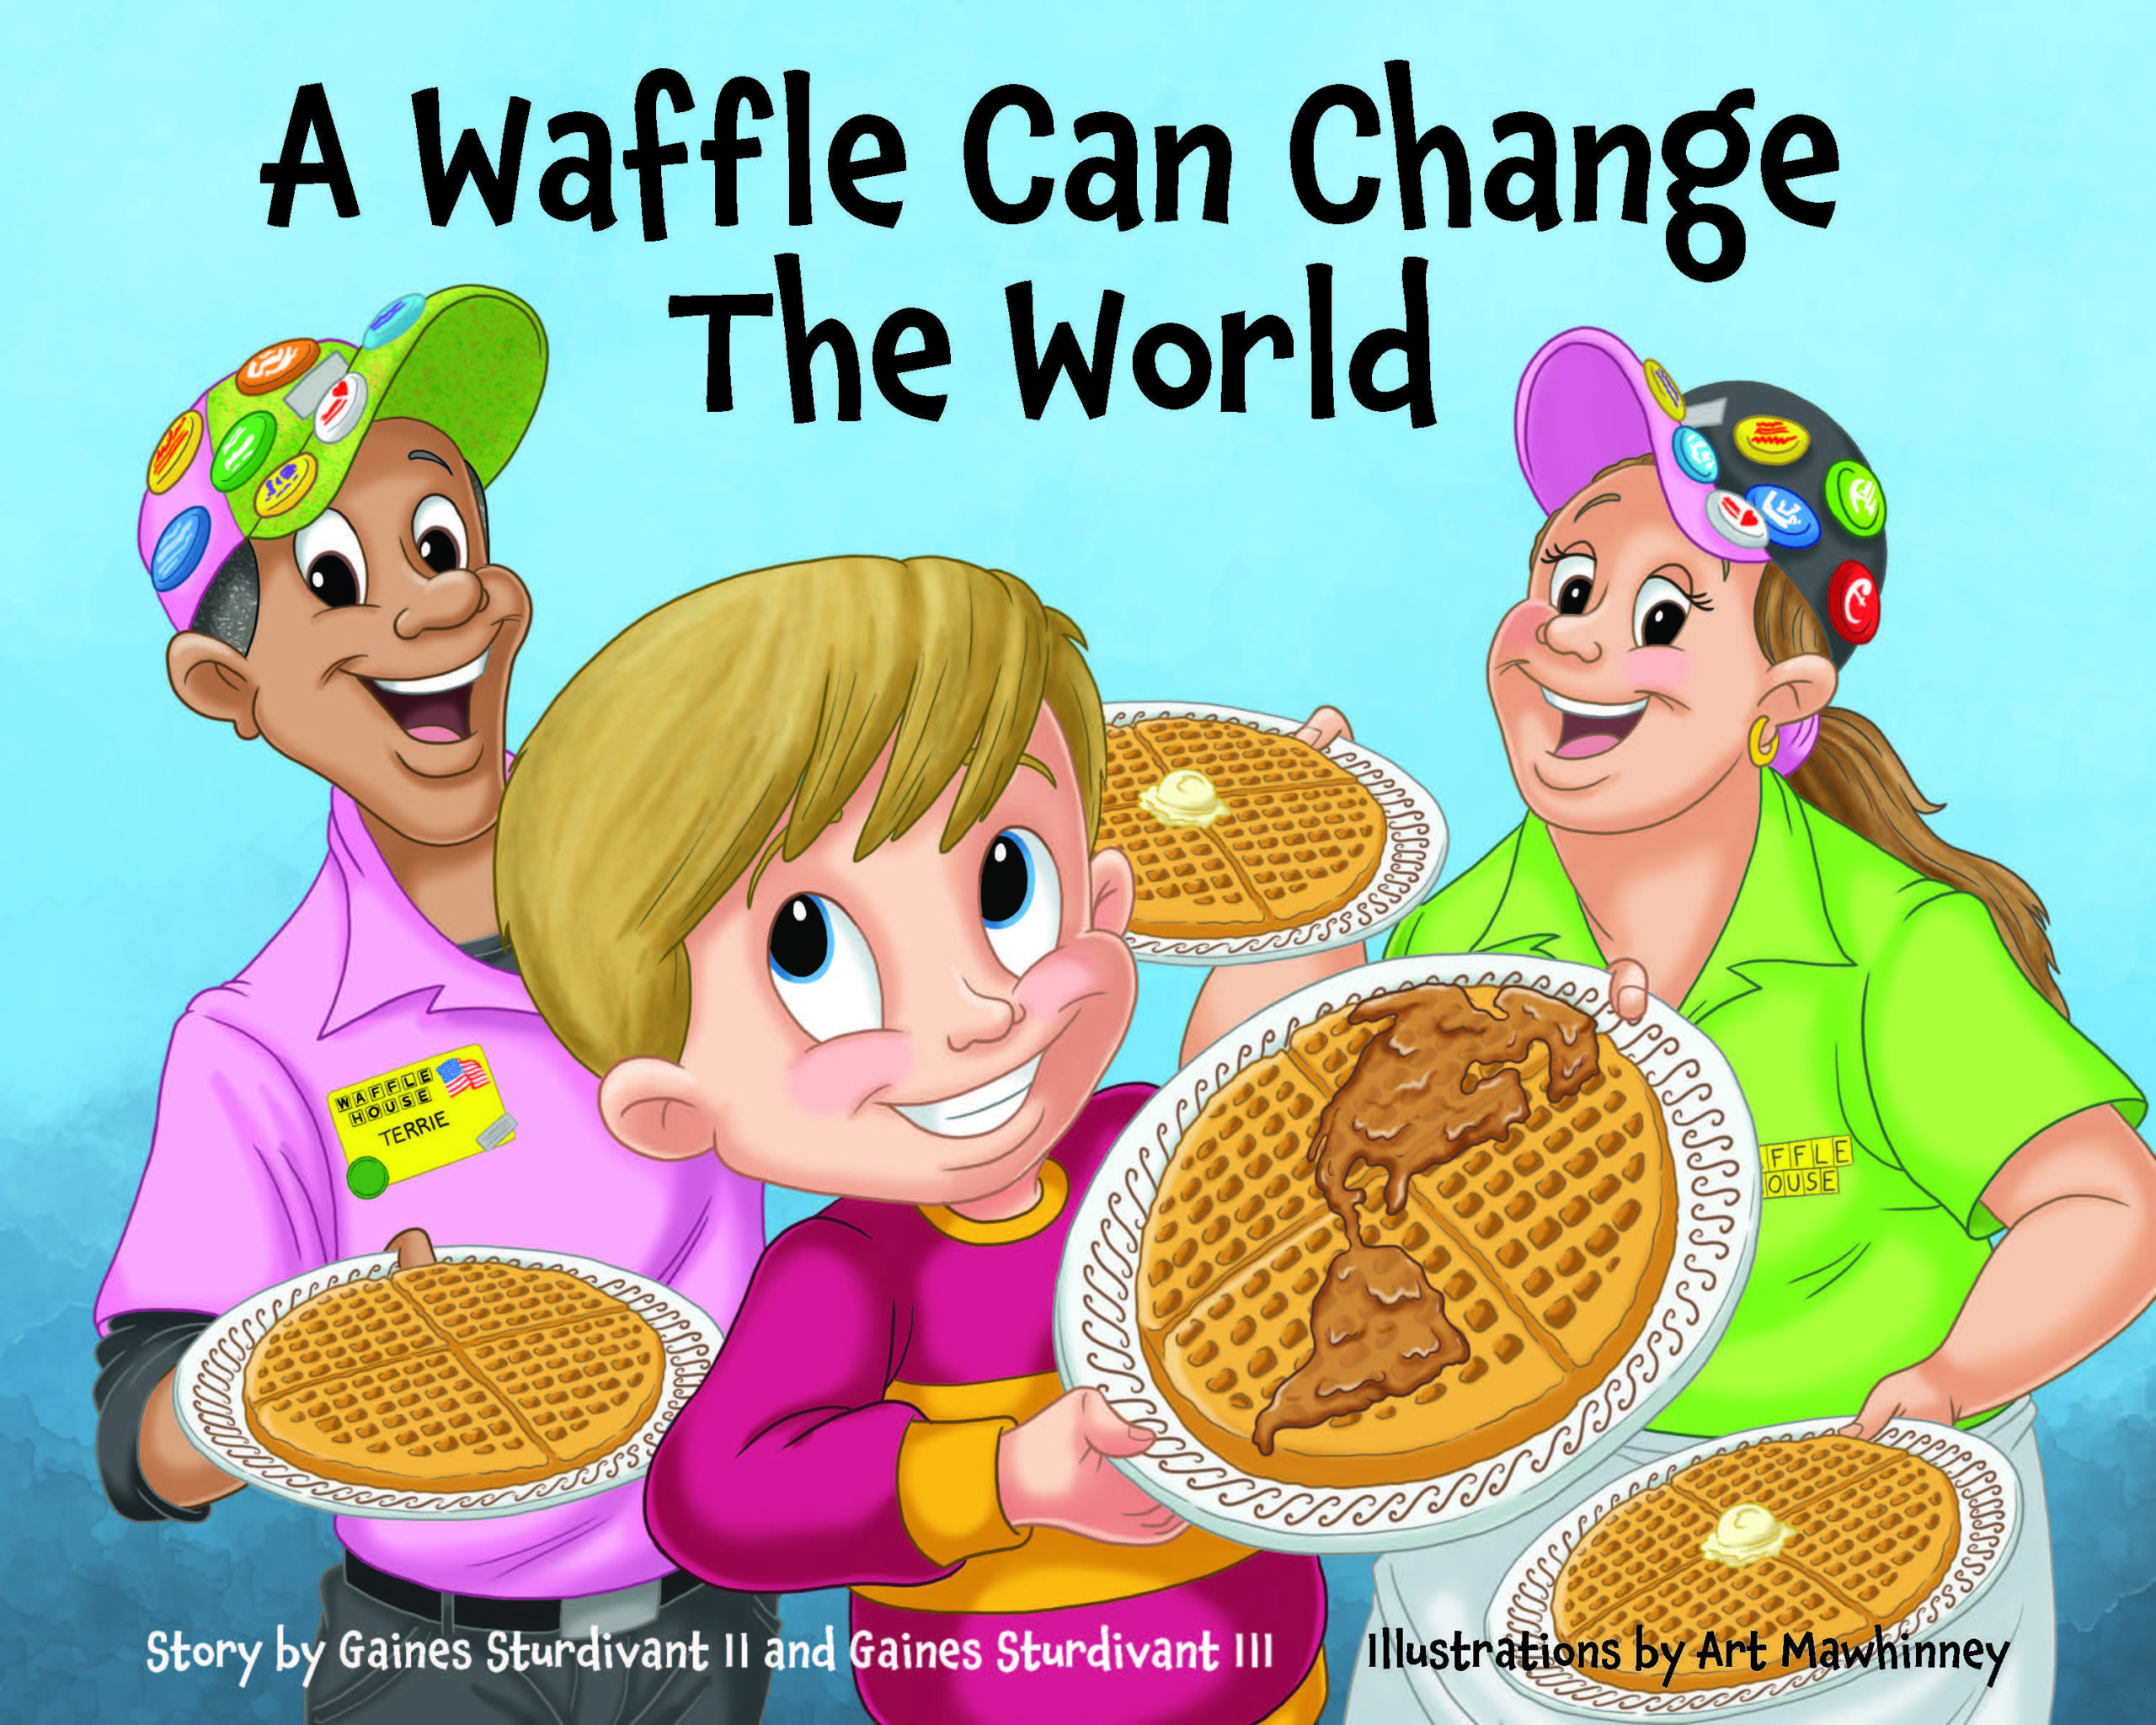 A Waffle Can Change the World